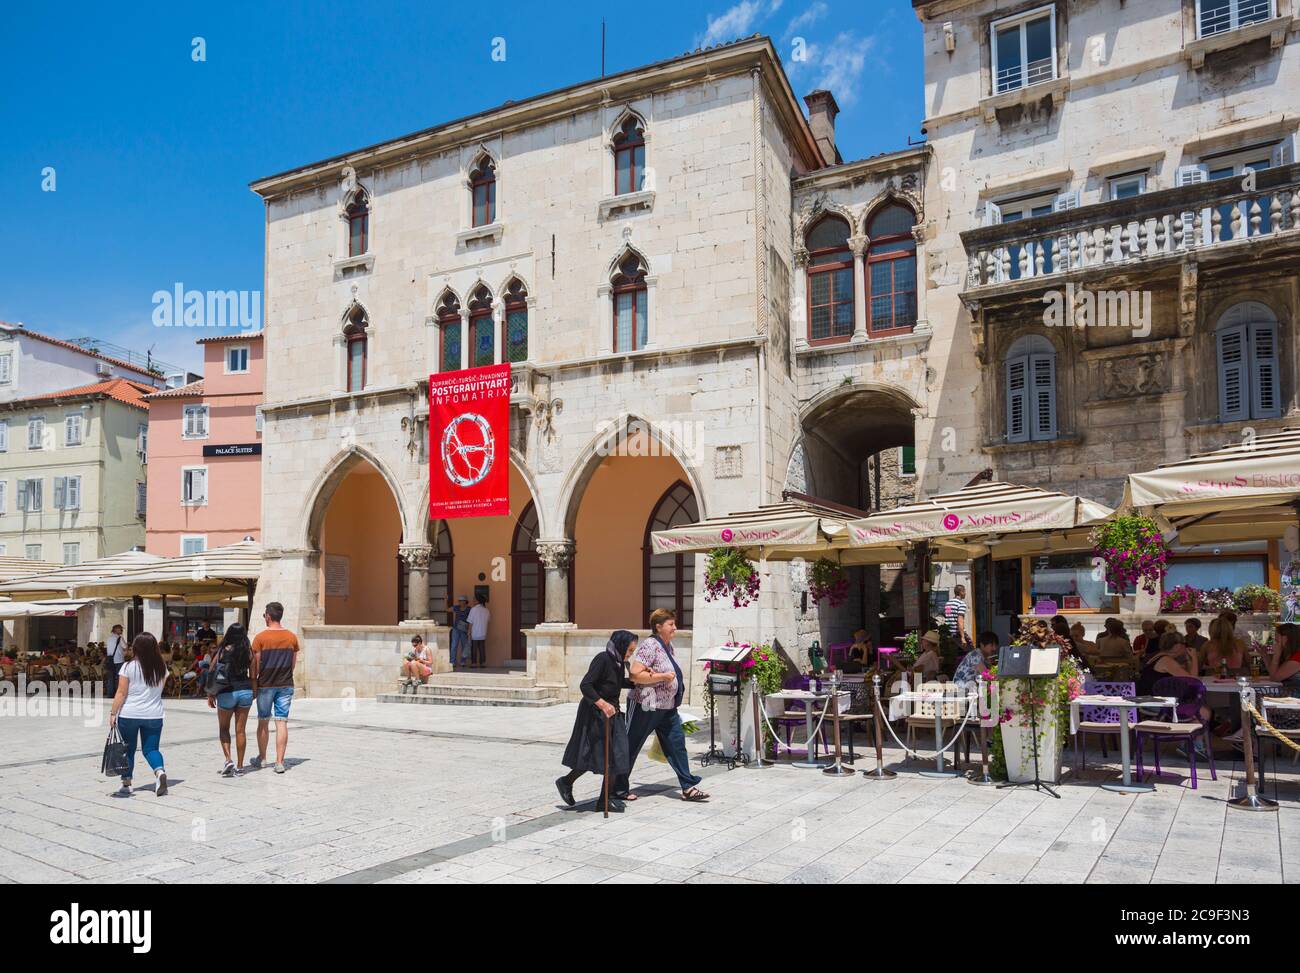 Split, Dalmatian Coast, Croatia.  People's Square.  The red banner hangs from the 15th century Renaissance Town Hall. The Historic Centre of Split is Stock Photo